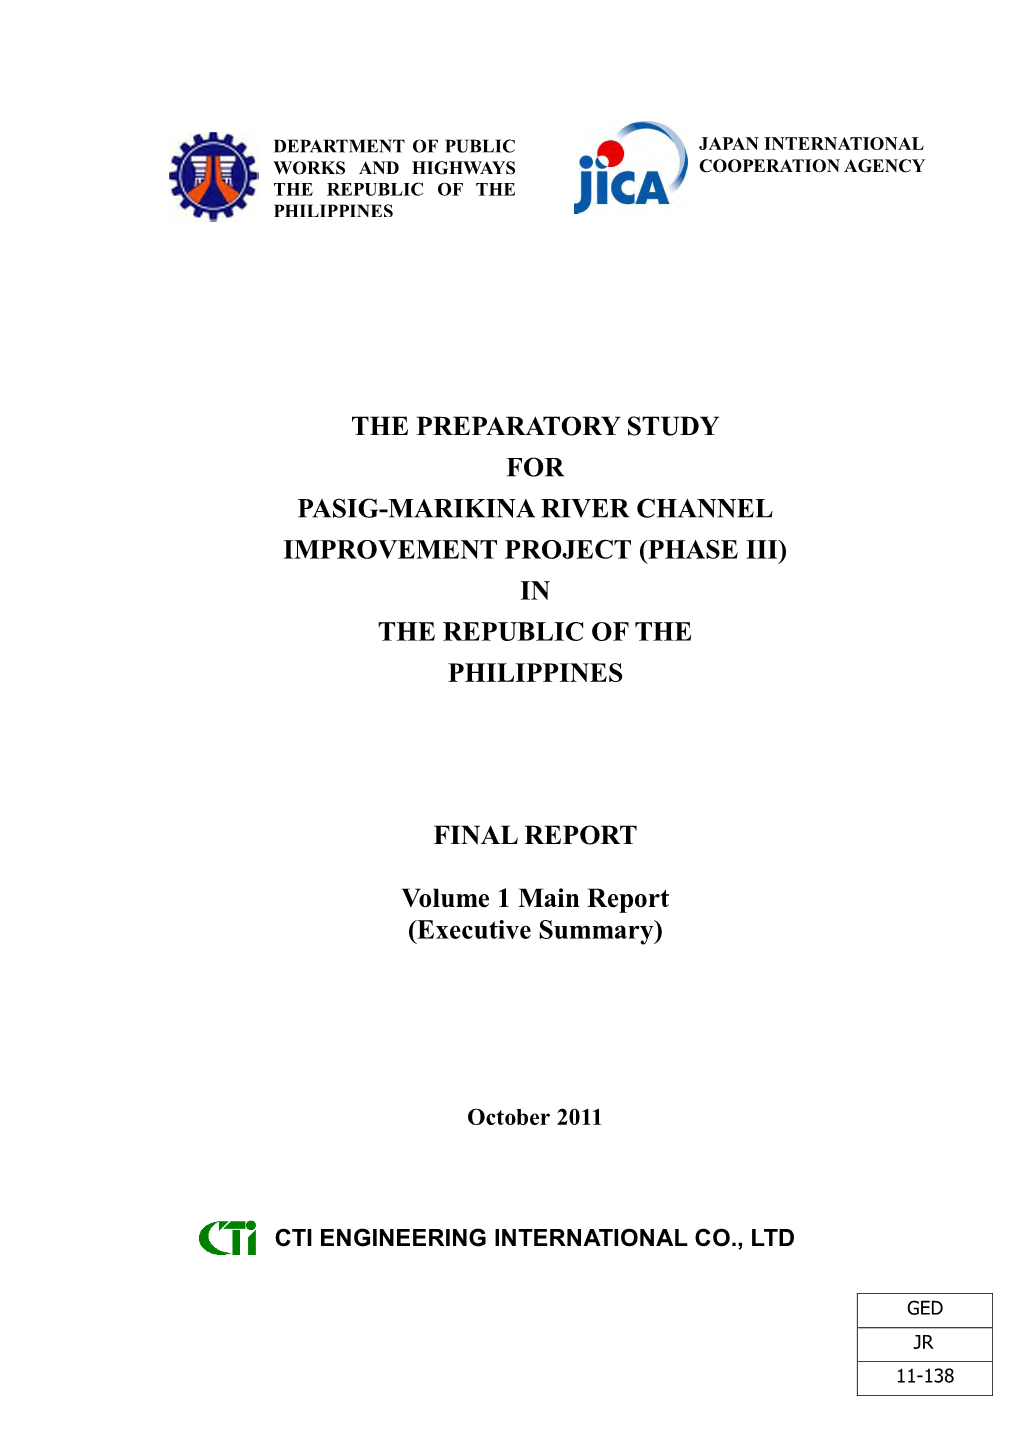 The Preparatory Study for Pasig-Marikina River Channel Improvement Project (Phase Iii) in the Republic of the Philippines